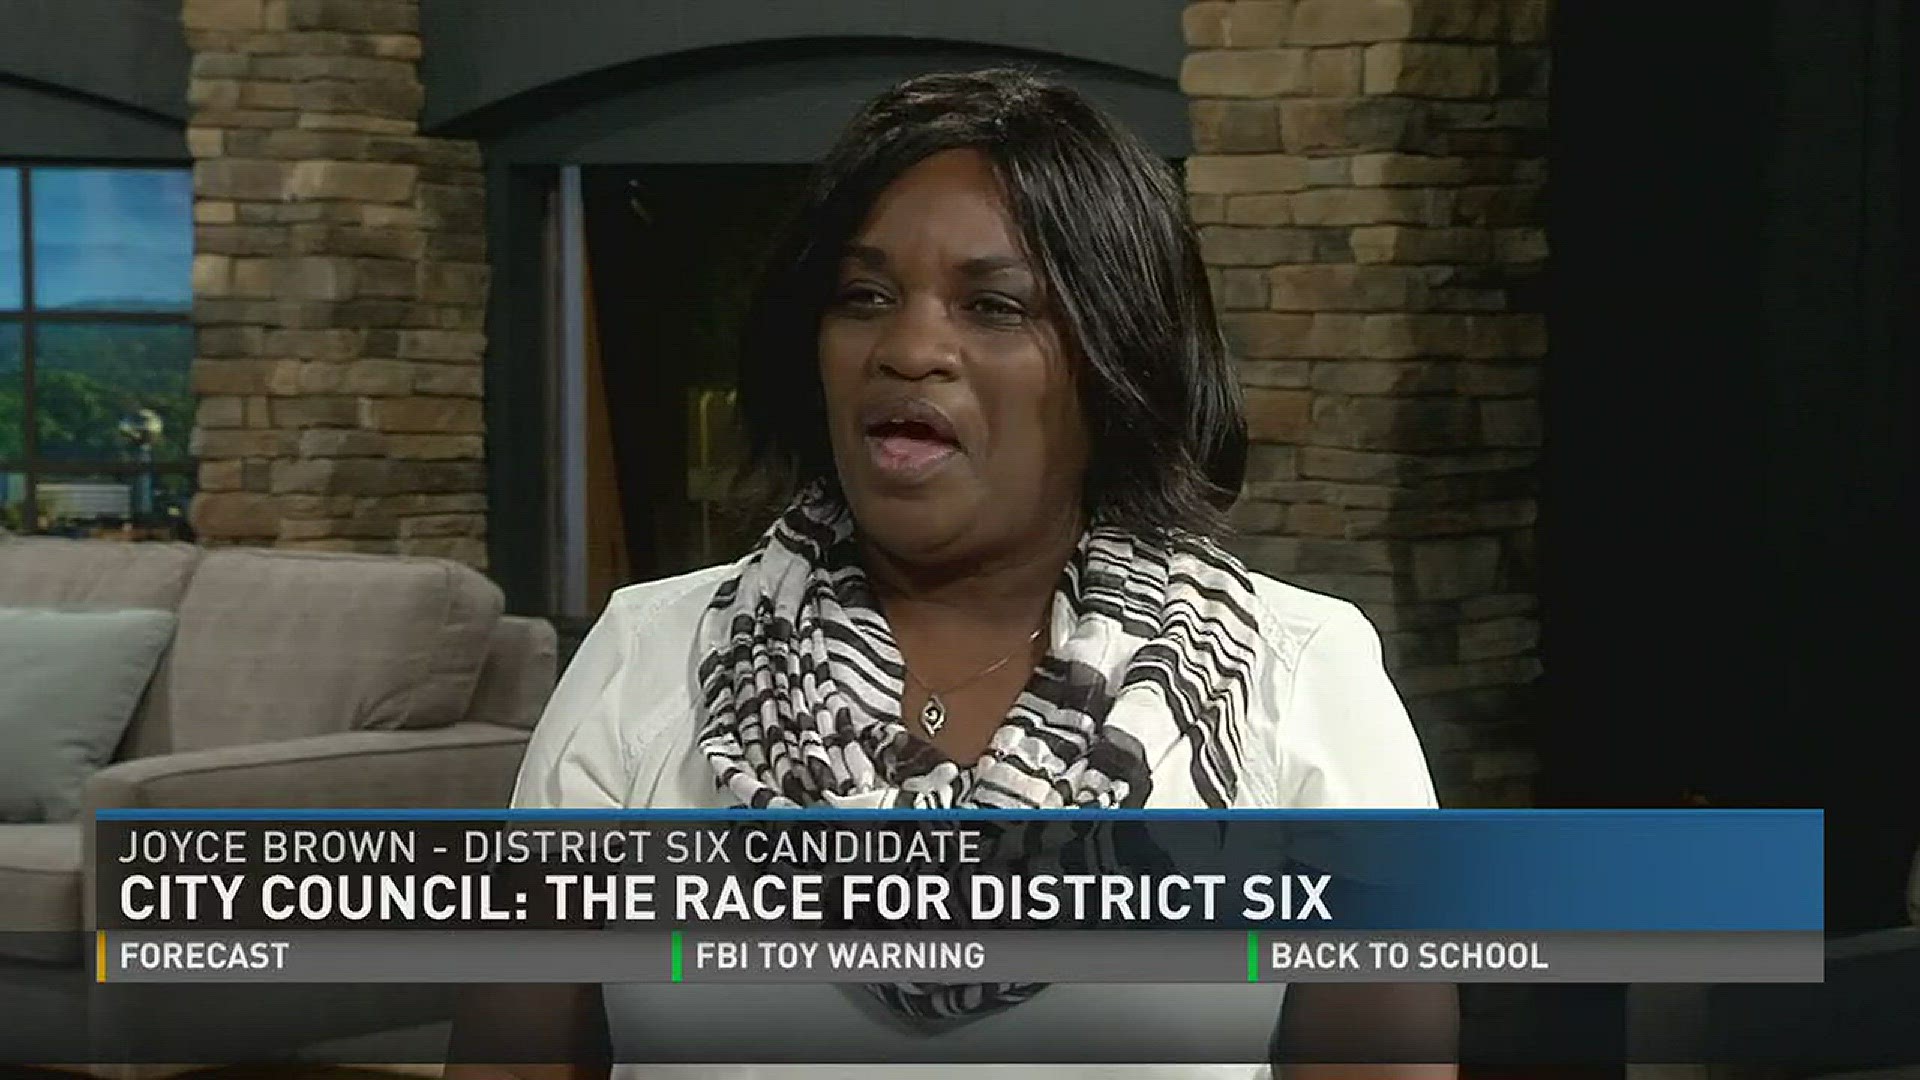 Knoxville city council race: district 6 candidate Joyce Brown